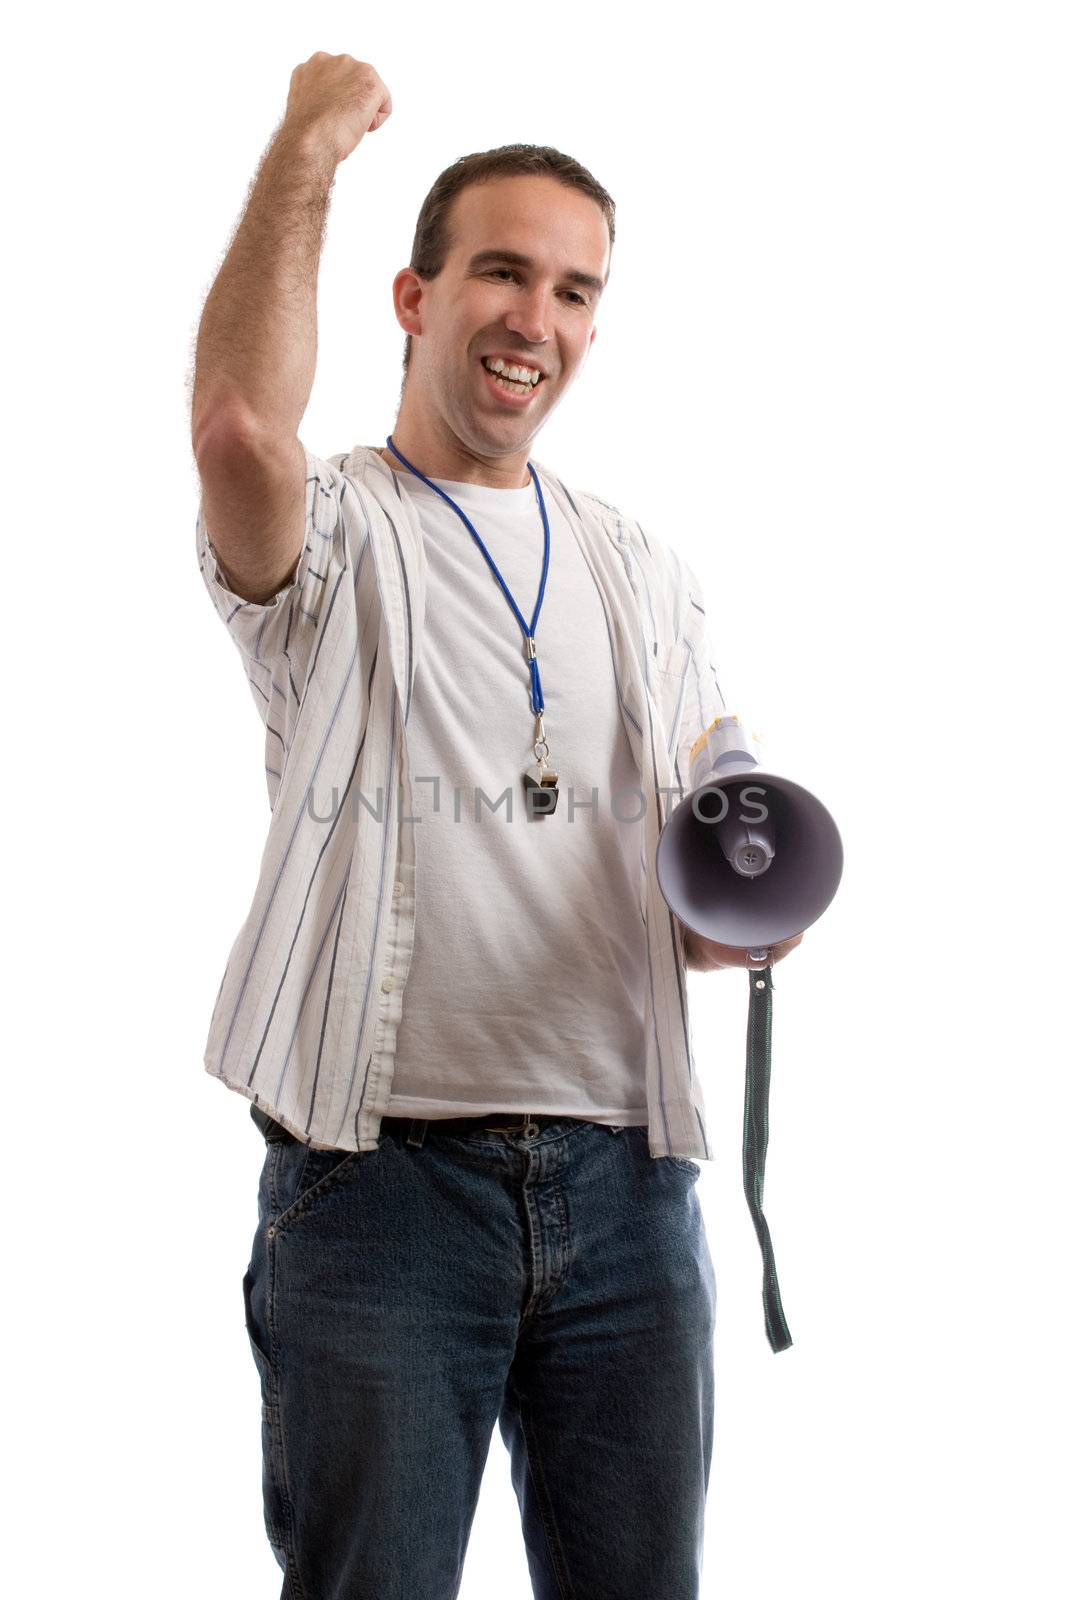 A coach is shaking his fist in the air, excited that his team is winning, isolated against a white background